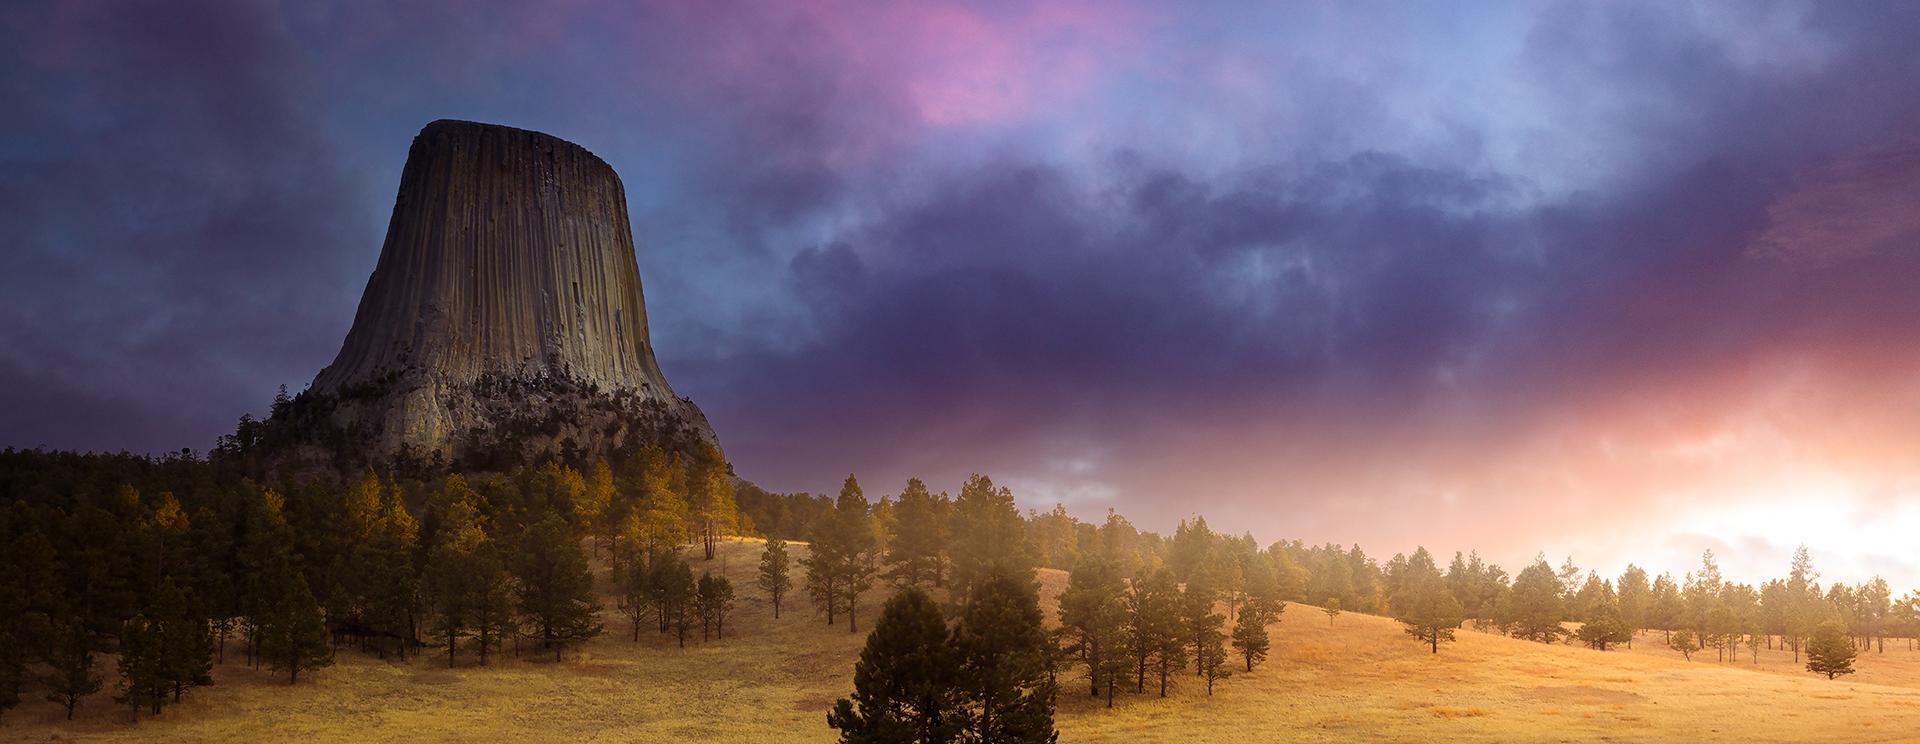 The 5 Most Outstanding Black Hills and Badlands Photos of November 2021